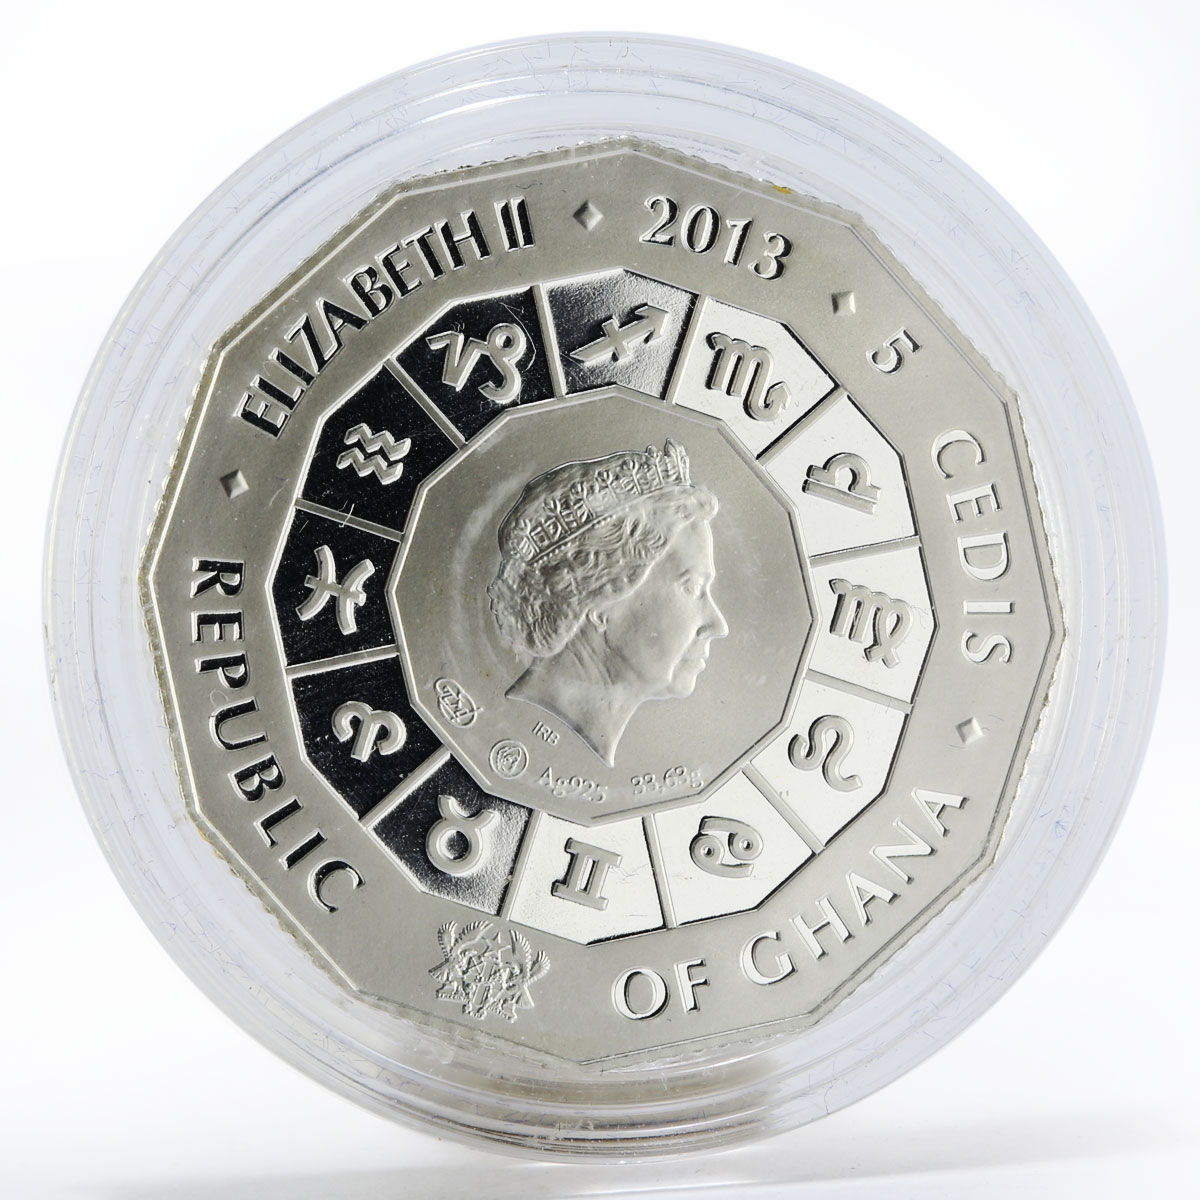 Ghana 5 cedis Goldfish symbol of luck gilded proof silver coin 2013